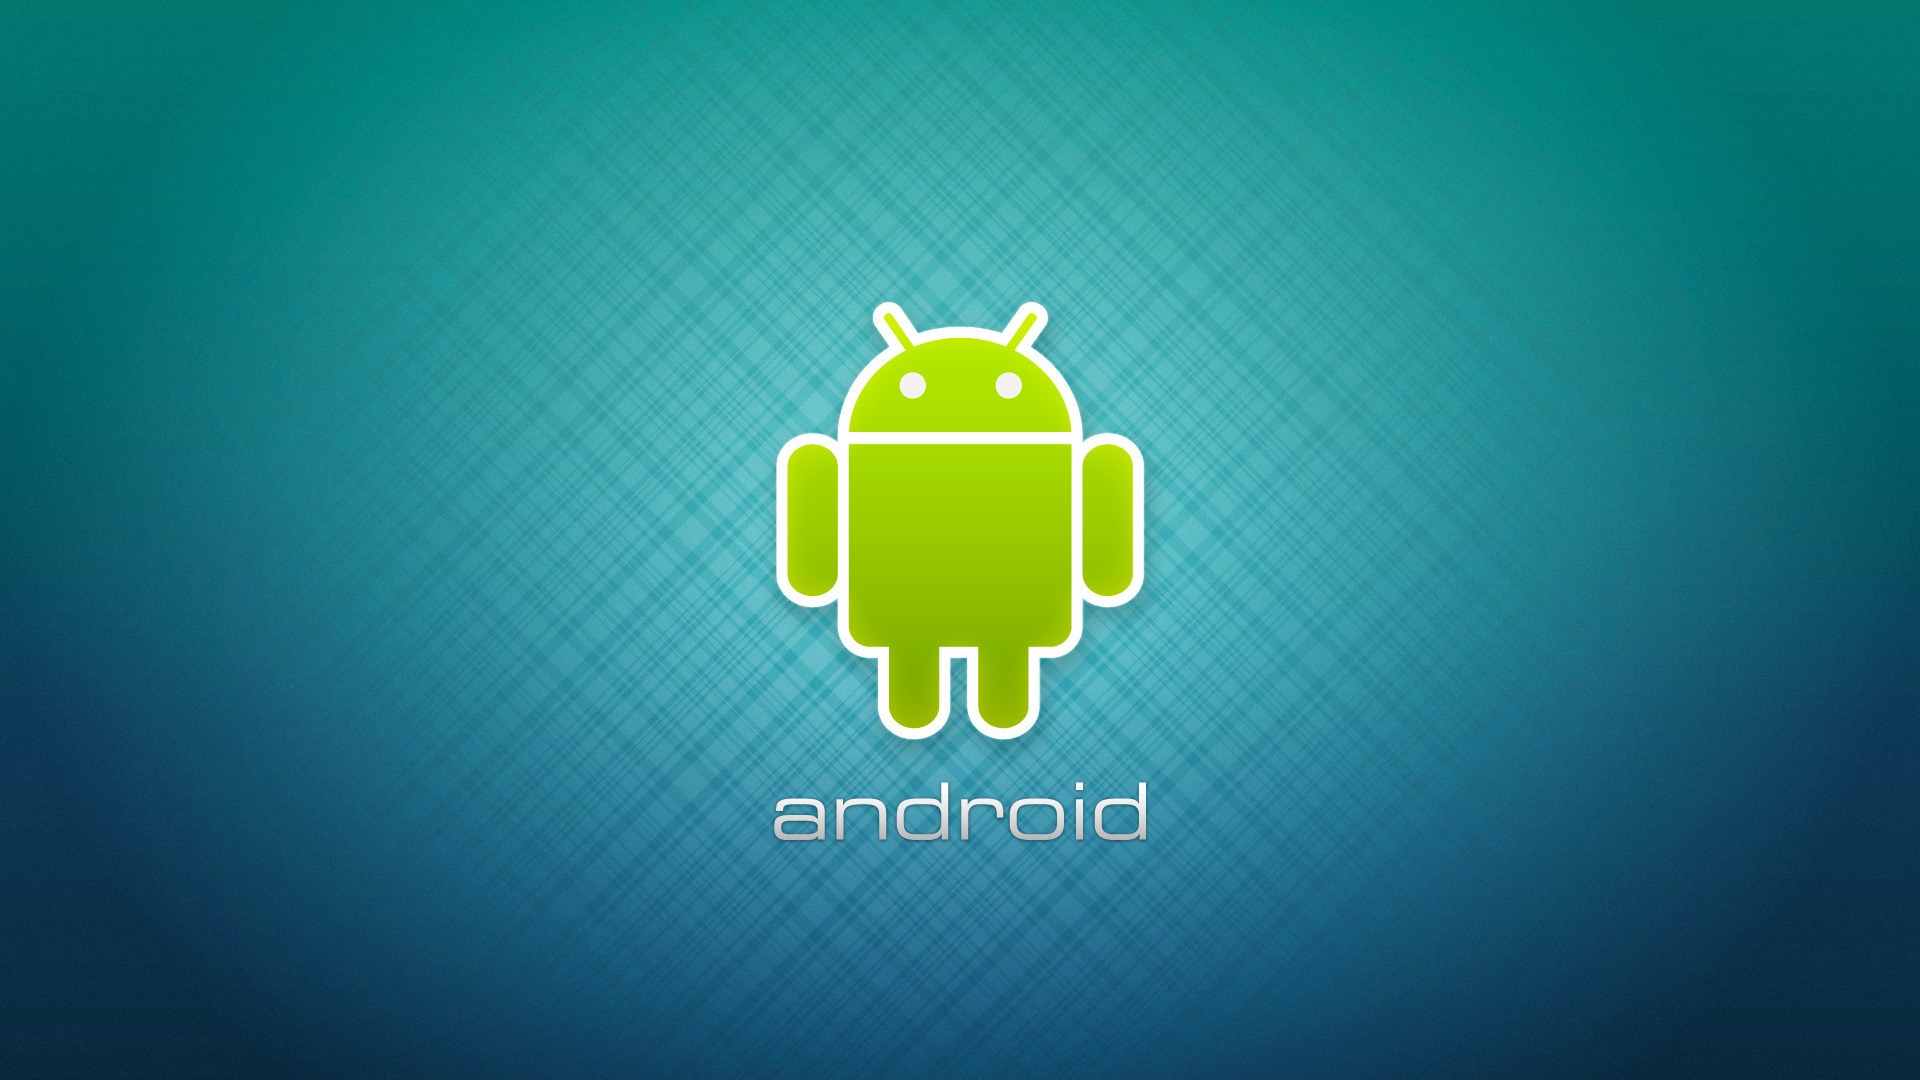 Just Android Logo for 1920 x 1080 HDTV 1080p resolution